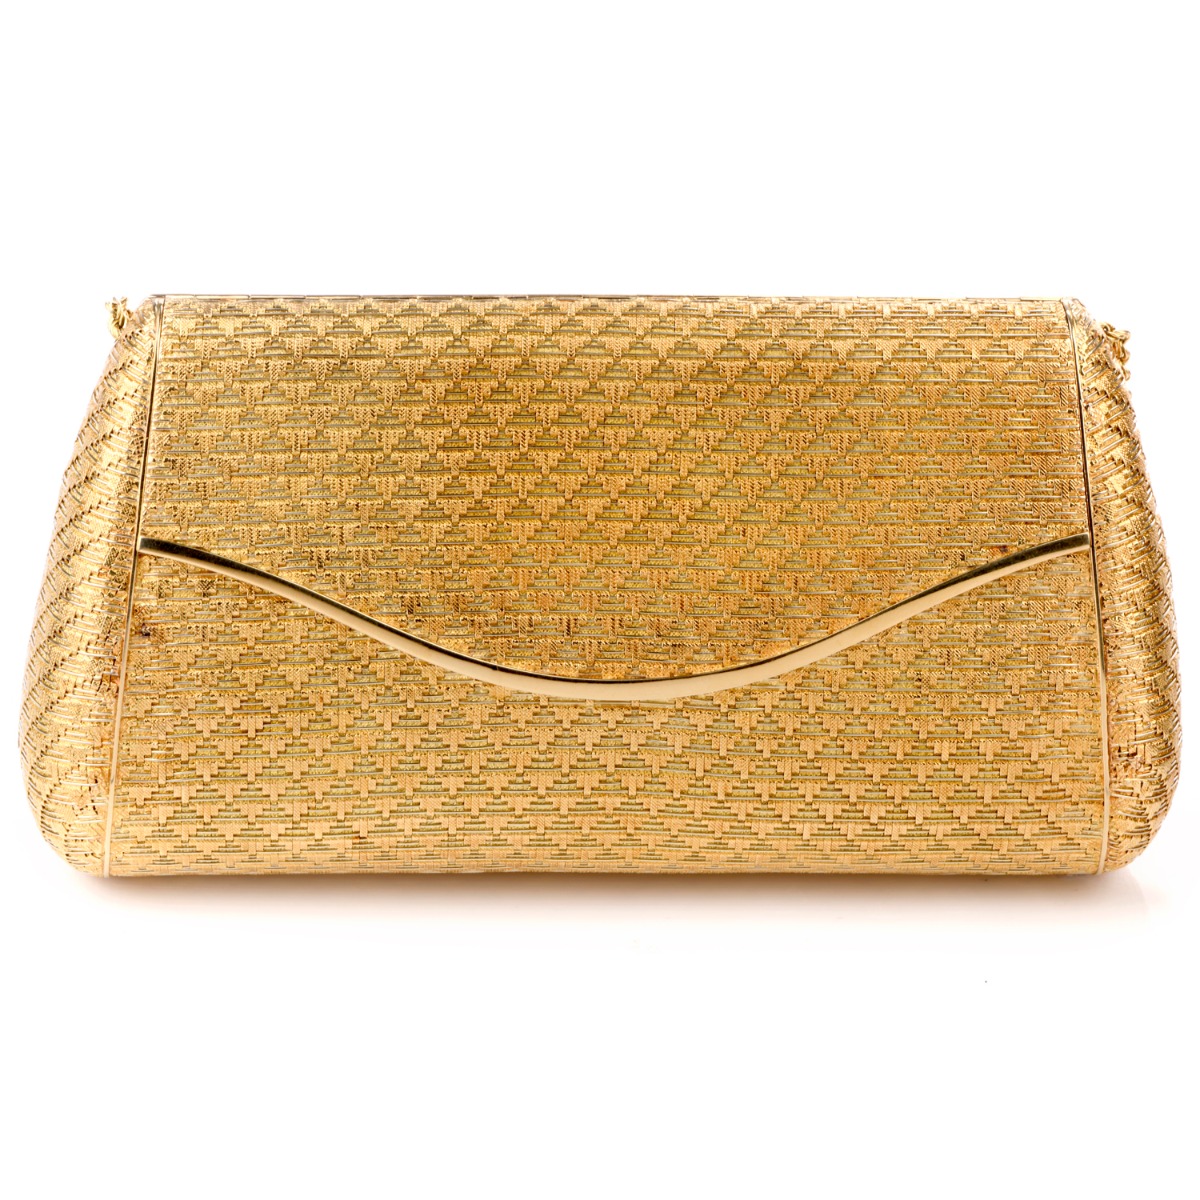 Buy Indian Gold Sequin Clutch Purse, Bag With Designer Pattern, Embroidery,  Velvet Fabric, Shoulder Strap and Handle for Wedding & Ethnic Wear. Online  in India - Etsy